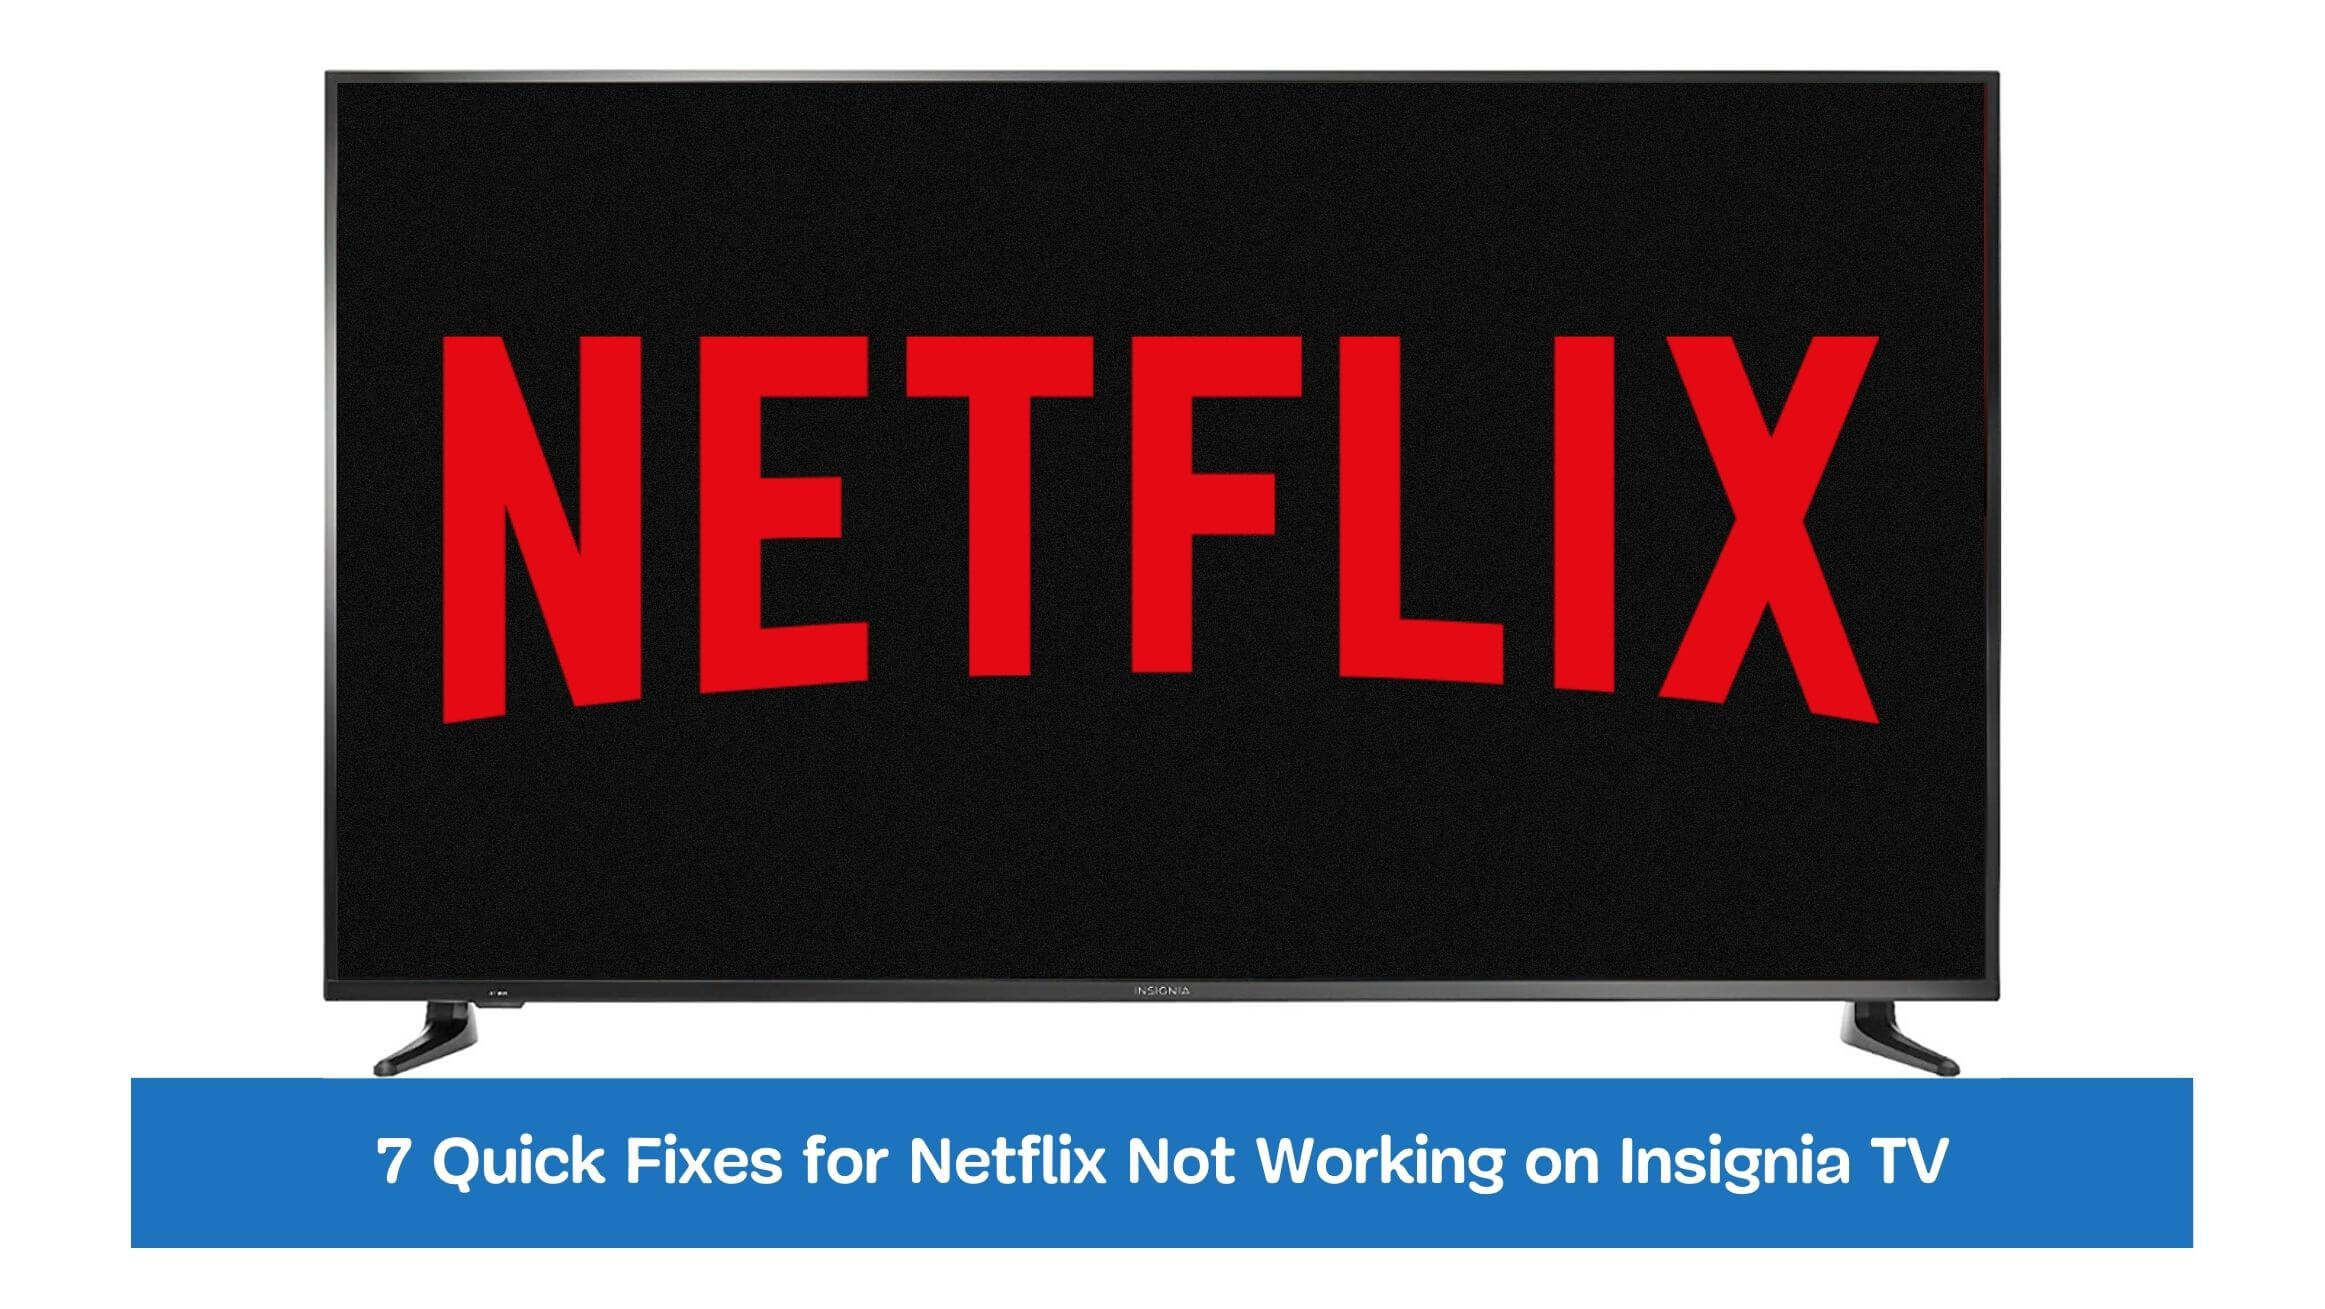 7 Quick Fixes for Netflix Not Working on Insignia TV